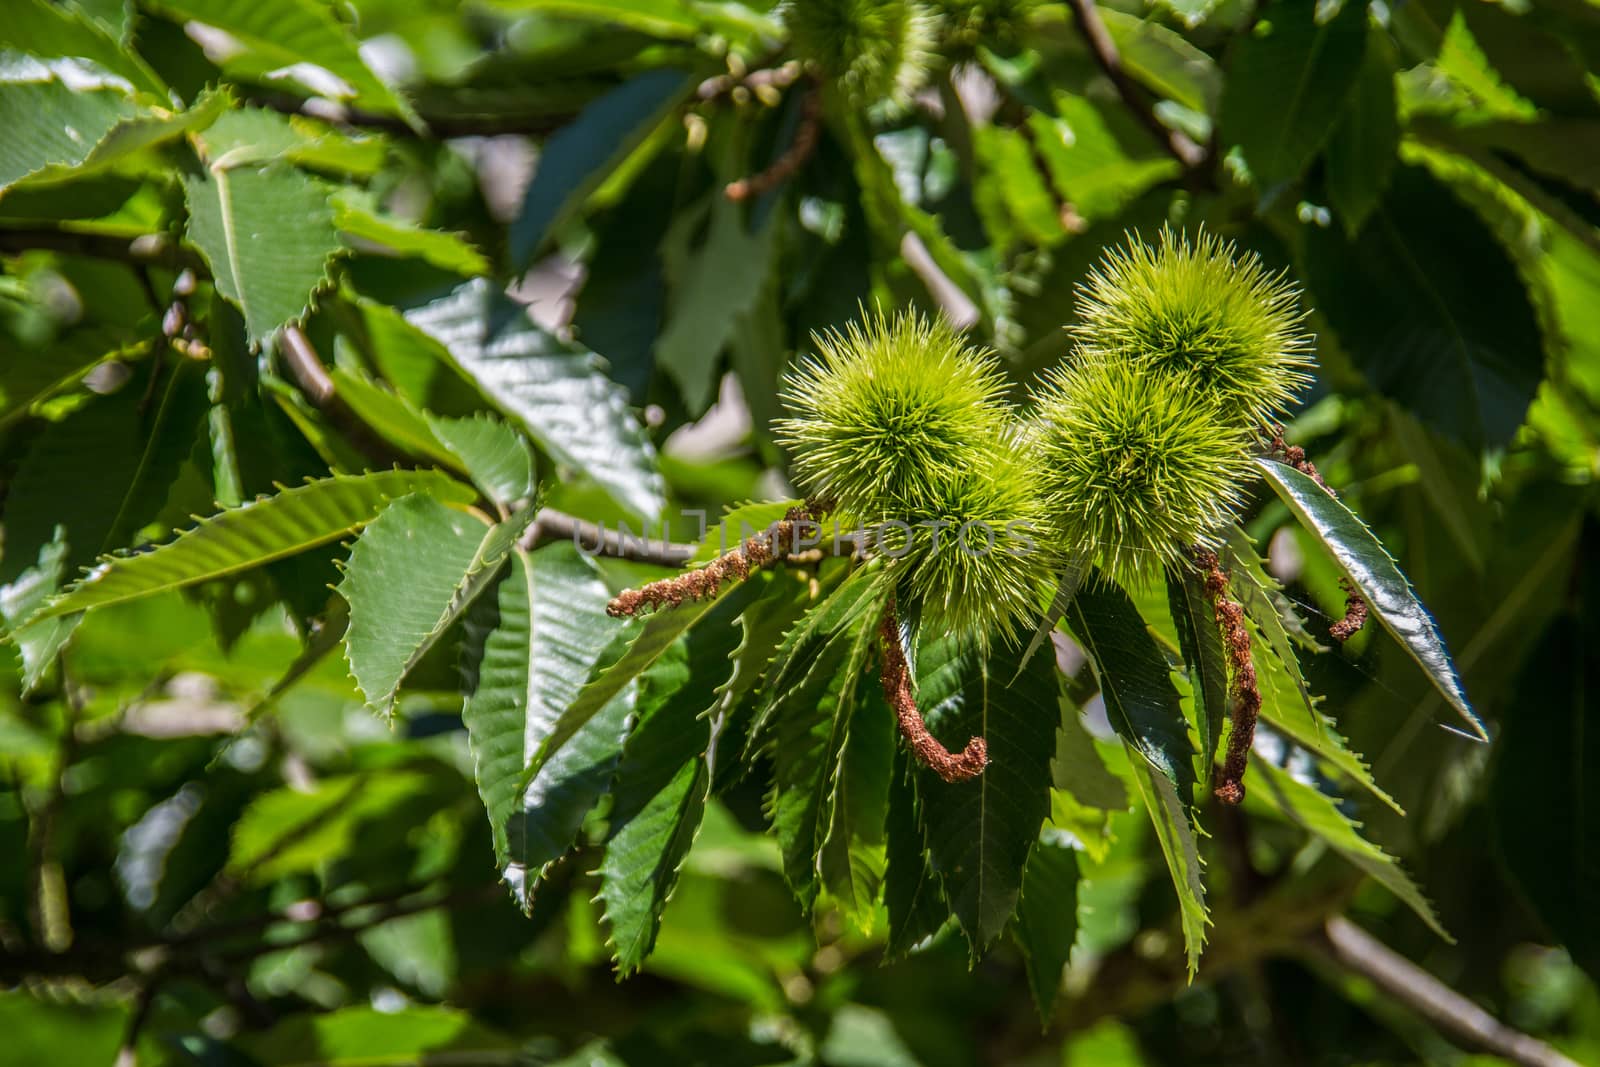 American chestnut in the Sayn castle courtyard by Dr-Lange